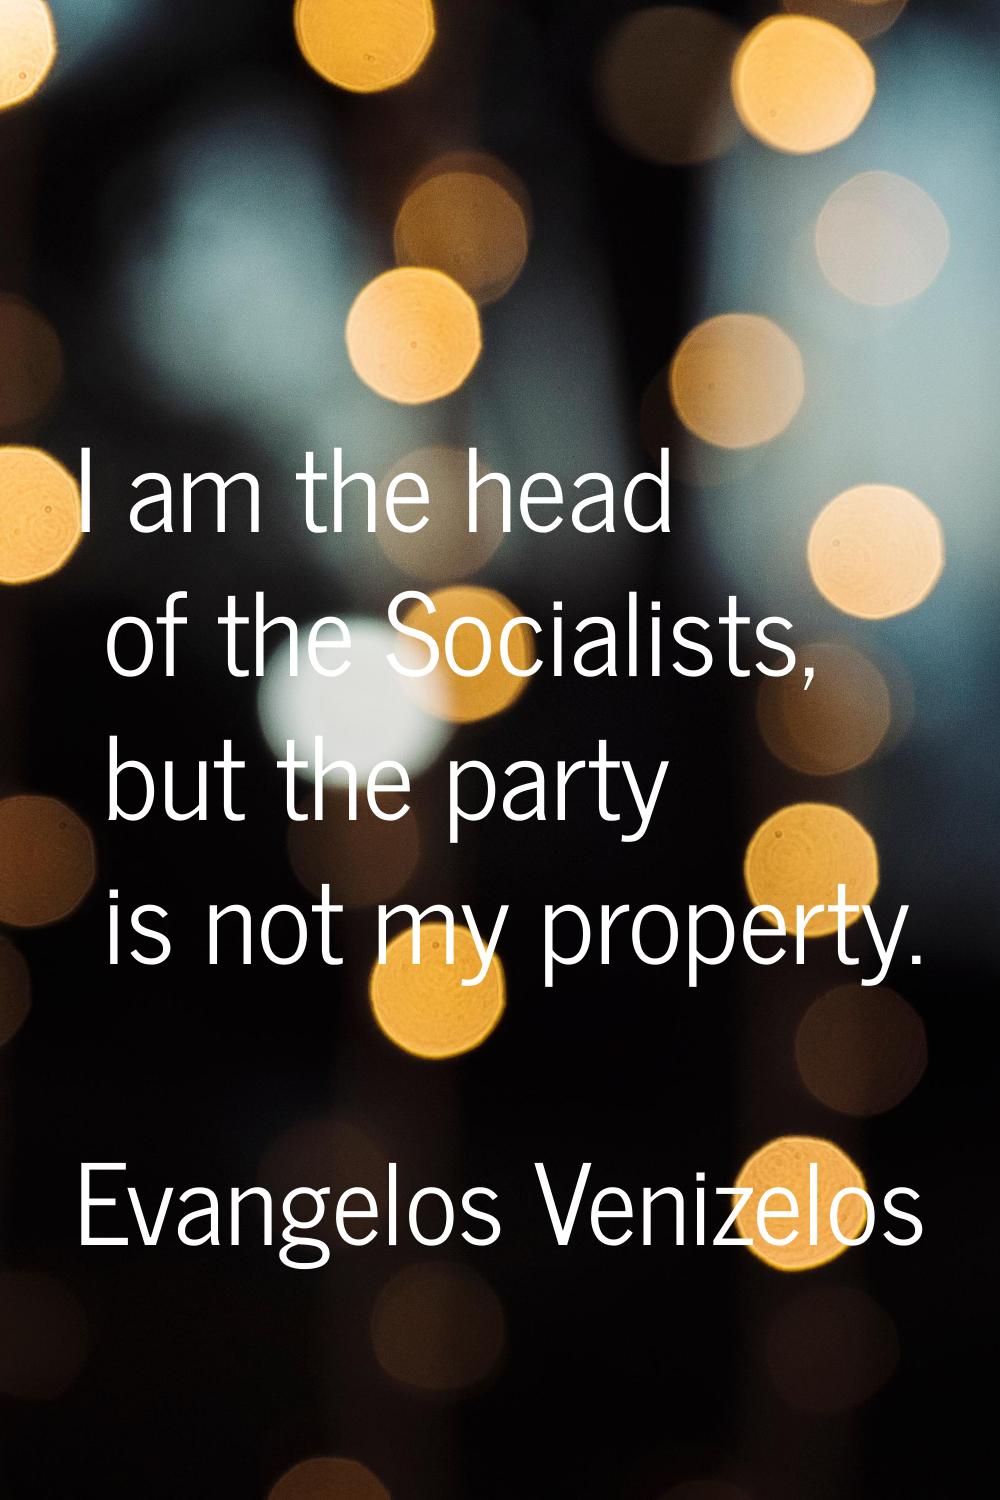 I am the head of the Socialists, but the party is not my property.